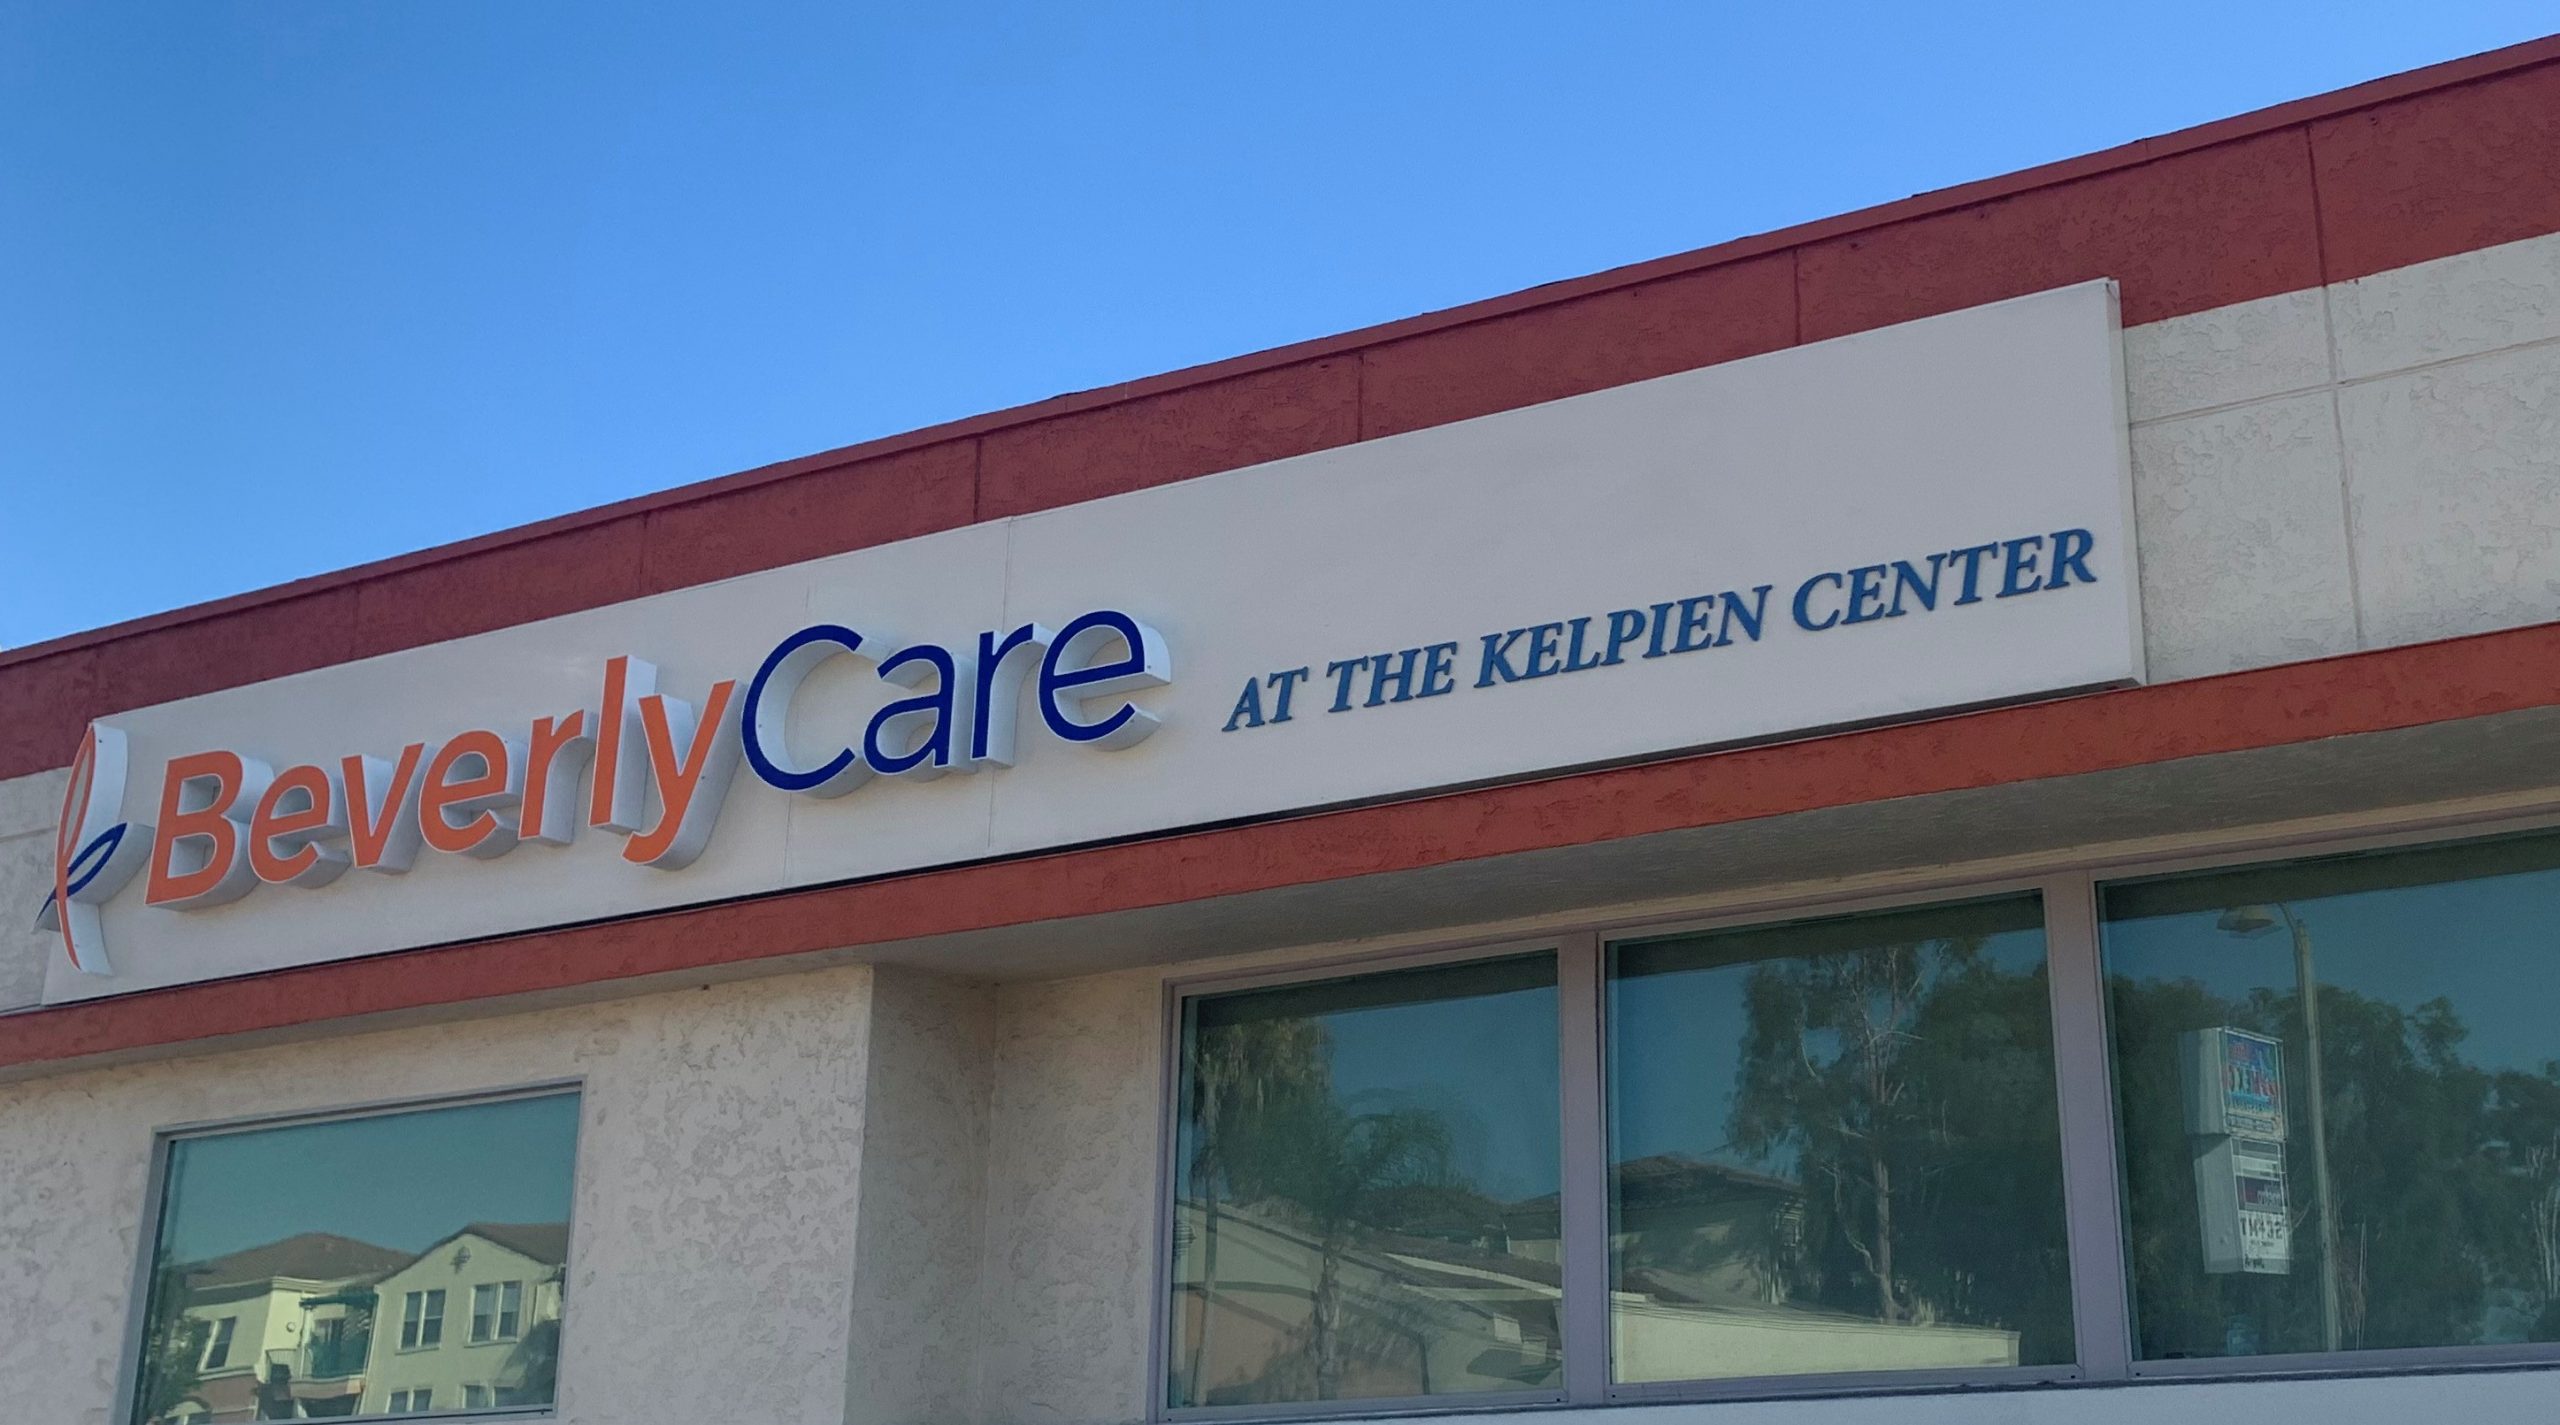 These are the front lit channel letters with acrylic lettering we fabricated and installed for BeverlyCare at the Kelpein Center in Montebello.